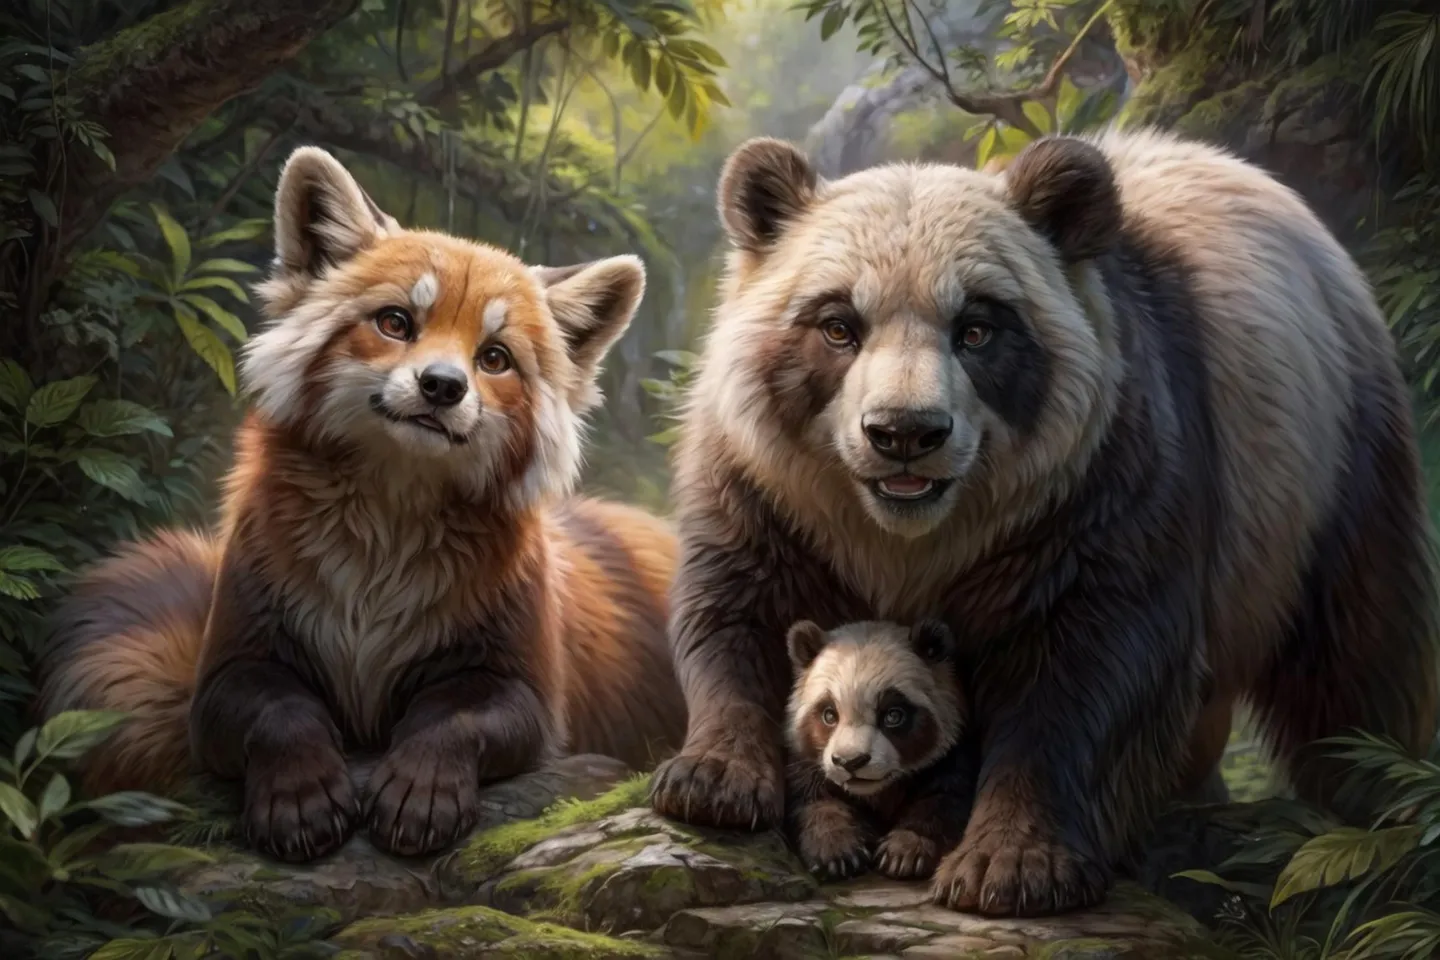 A scene of a red panda, giant panda, and a baby panda resting in a lush green forest. This is an AI-generated image using Stable Diffusion.